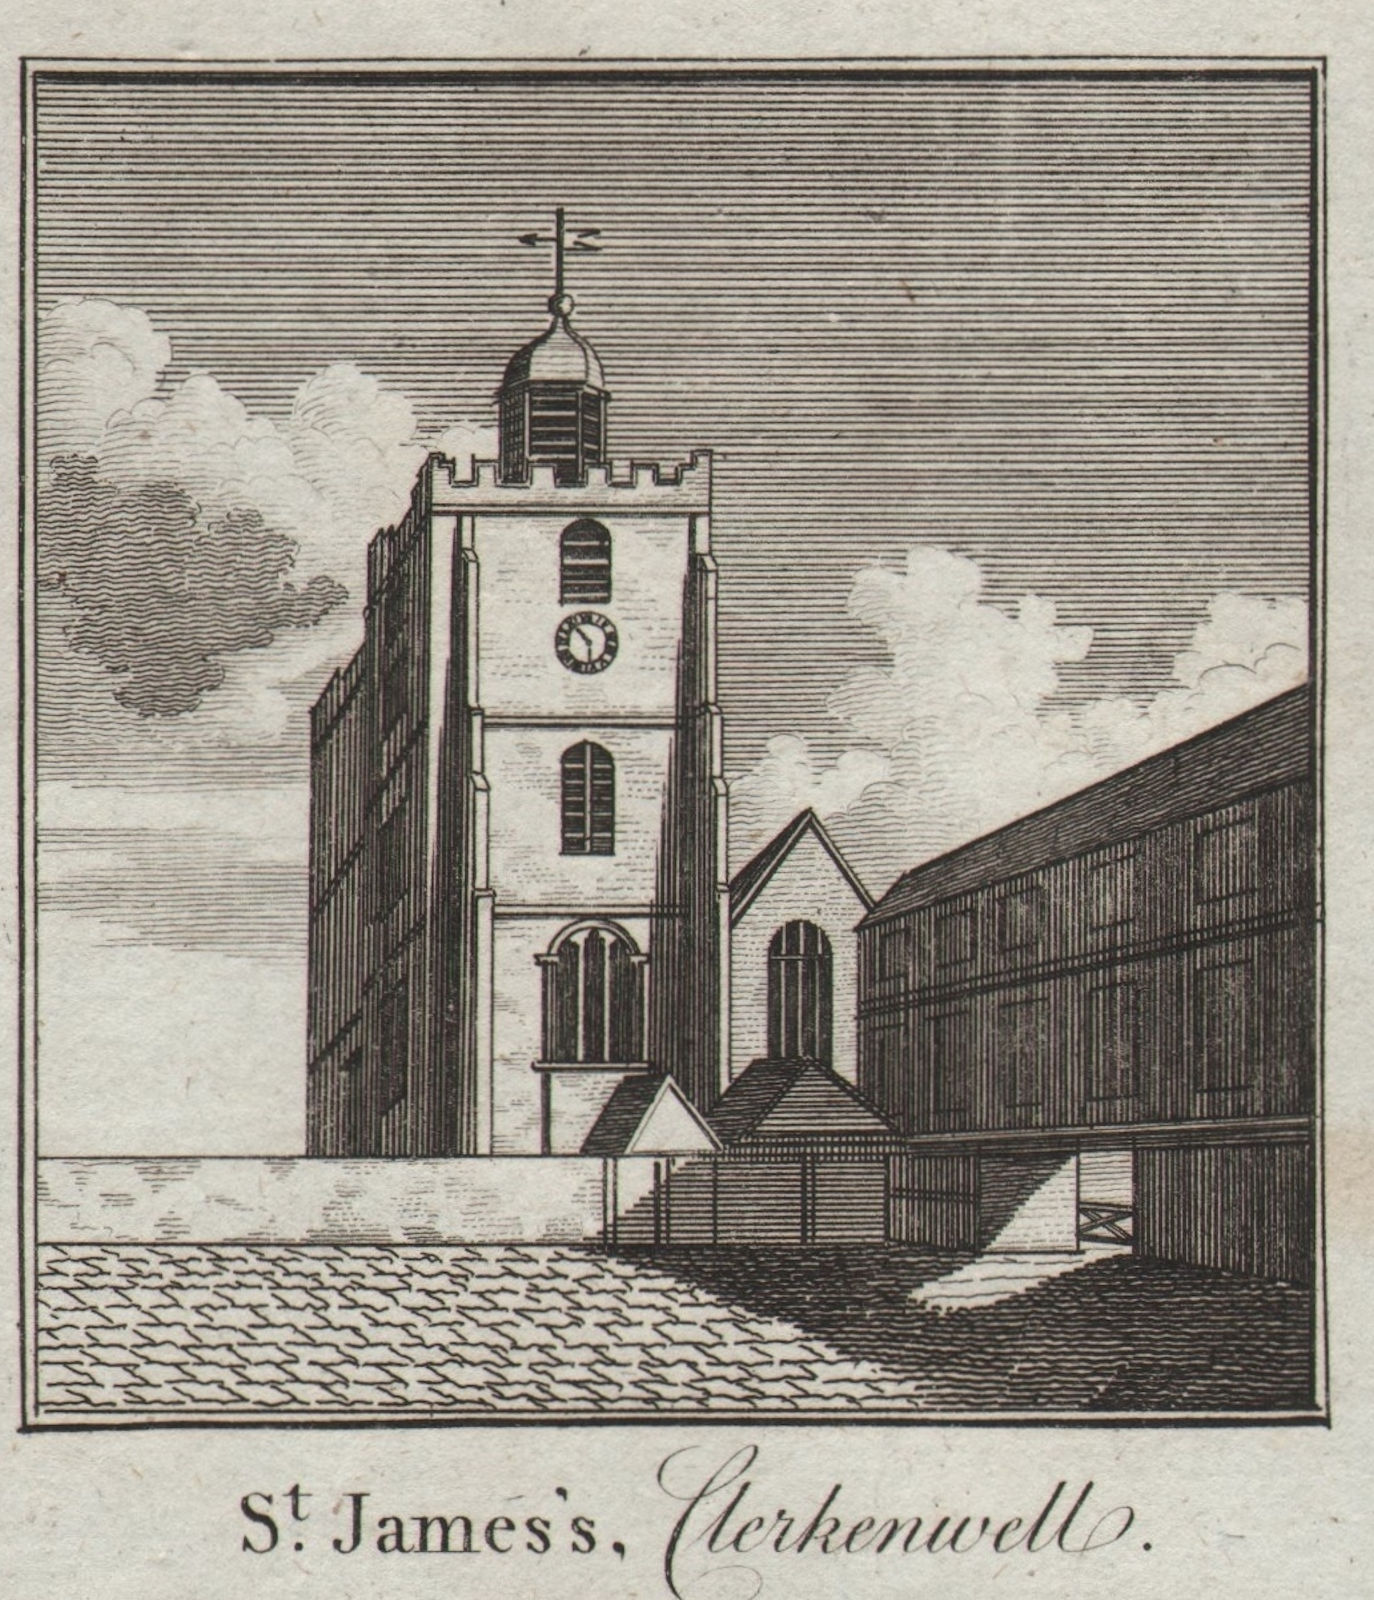 Associate Product Old church of St. James, Clerkenwell. SMALL. THORNTON 1784 antique print